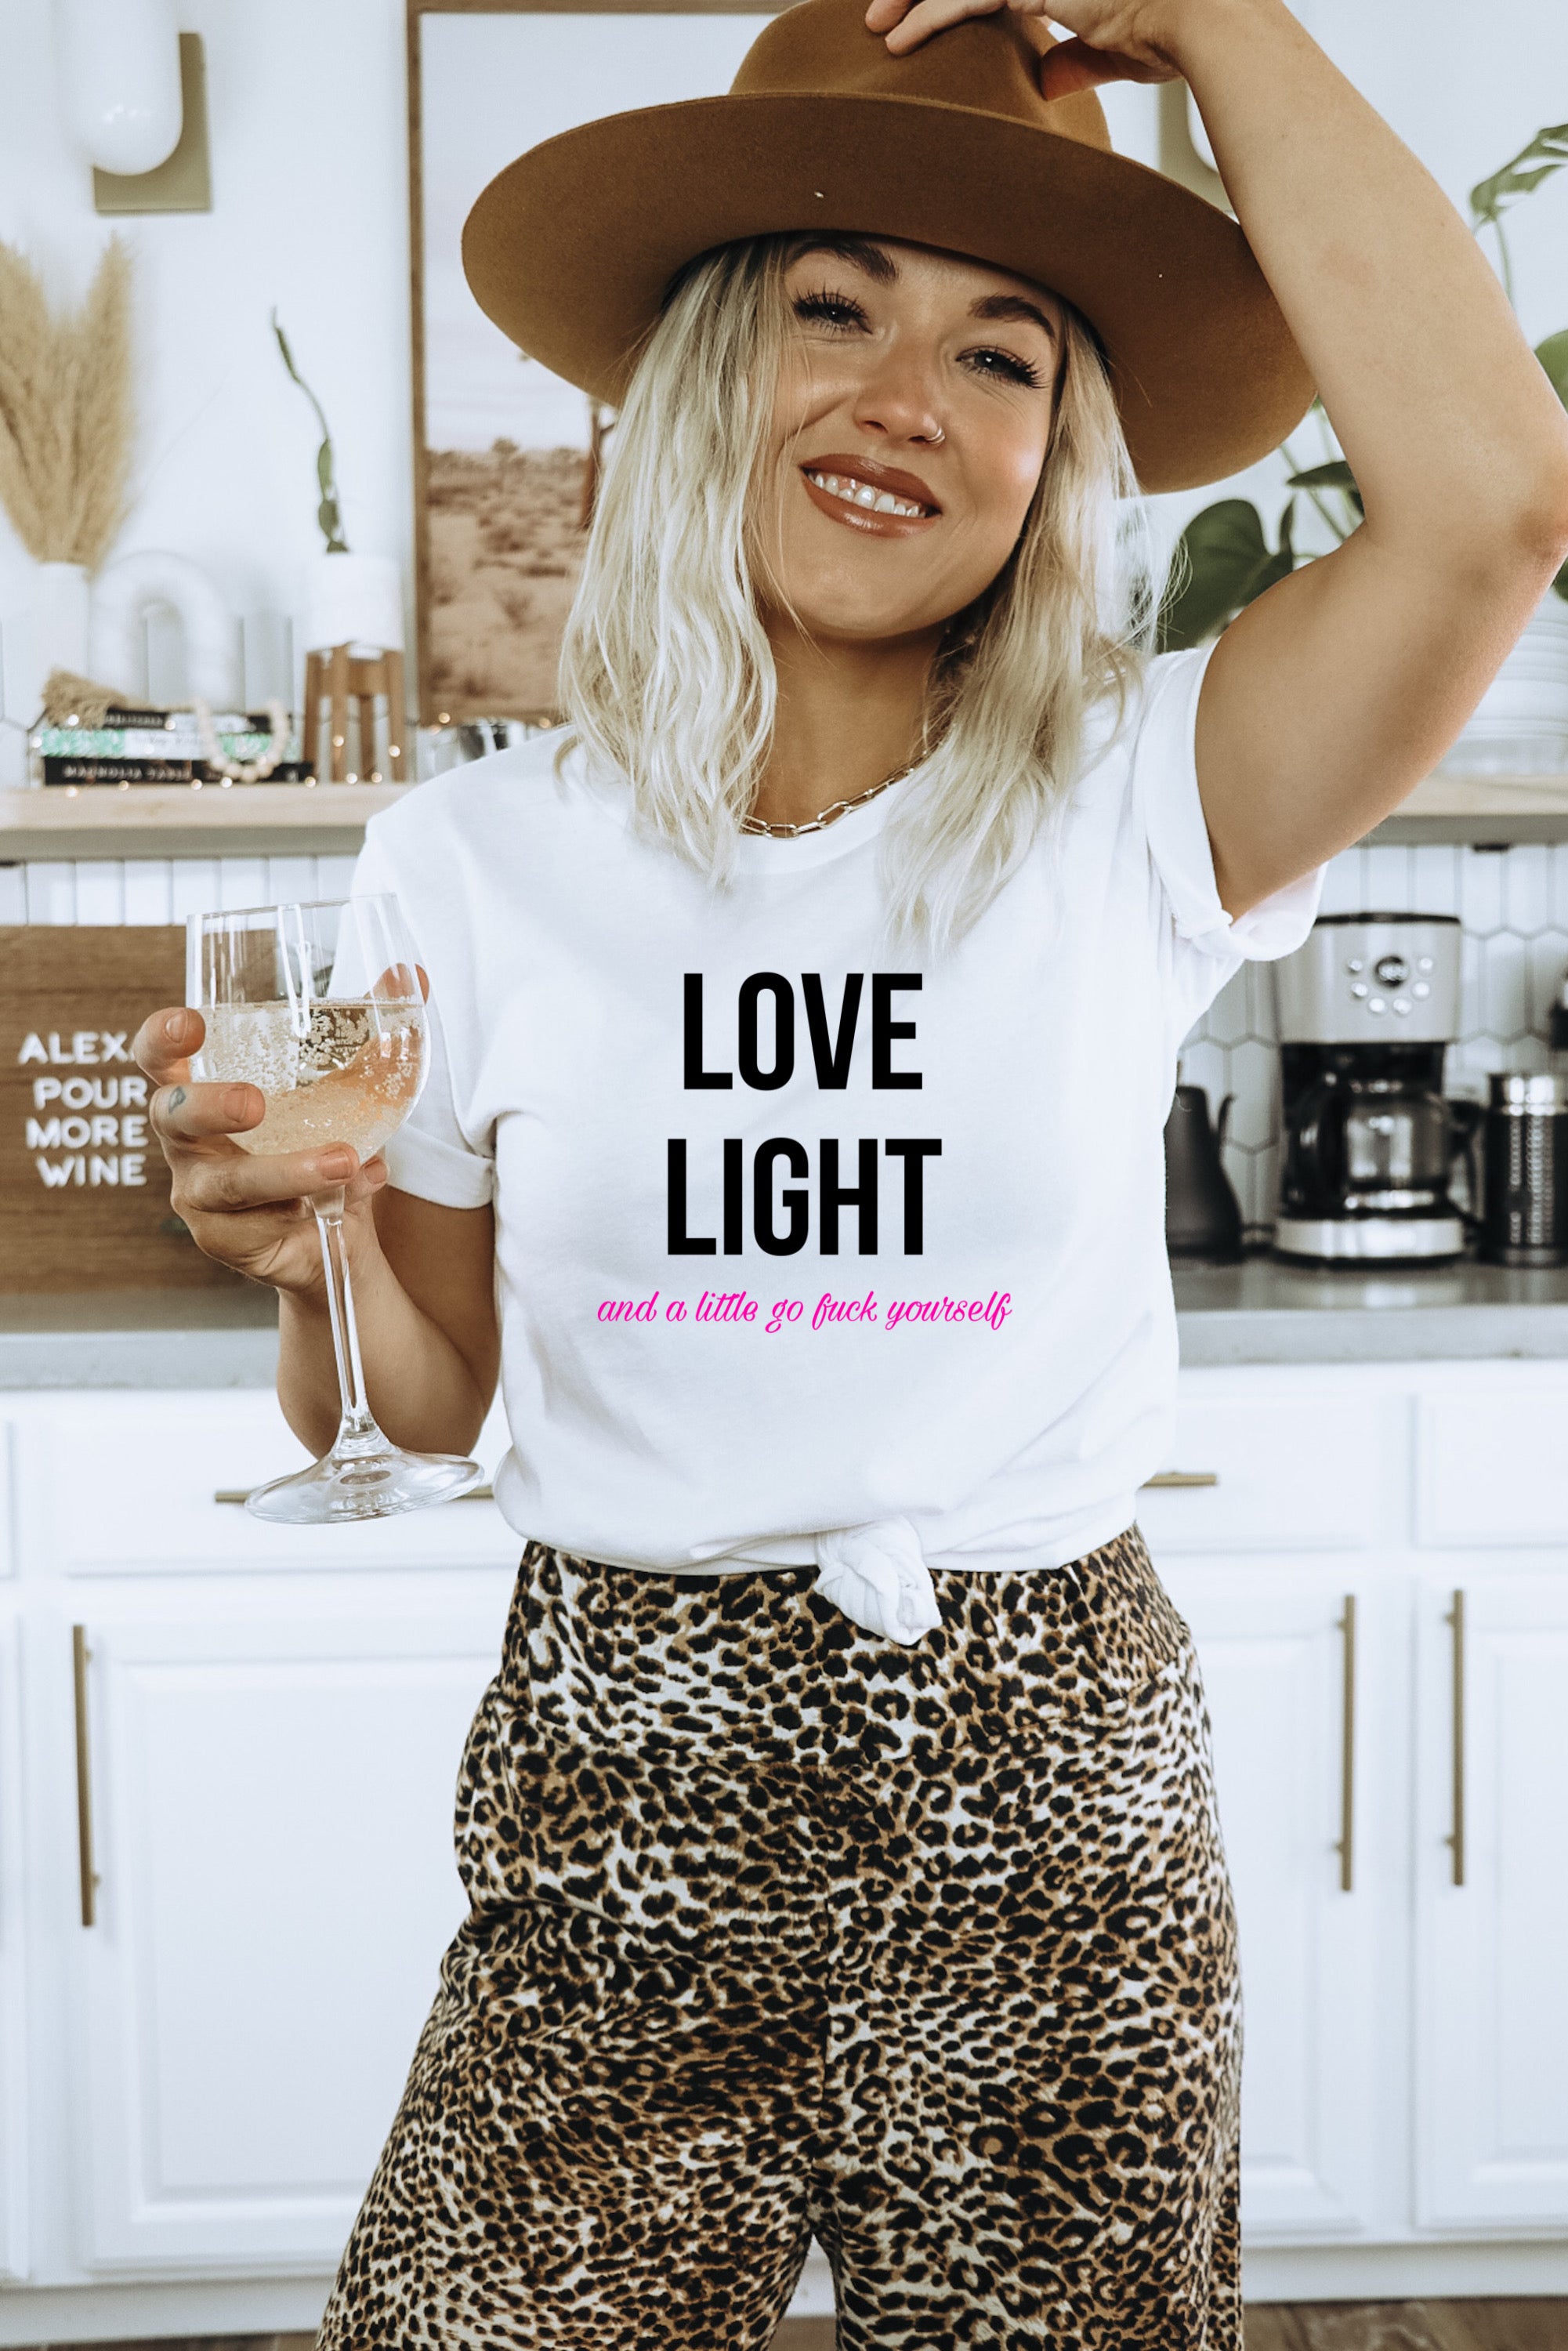 Love Light and a Little Go Fuck Yourself Loose Fit Tee - Yoga Bitch